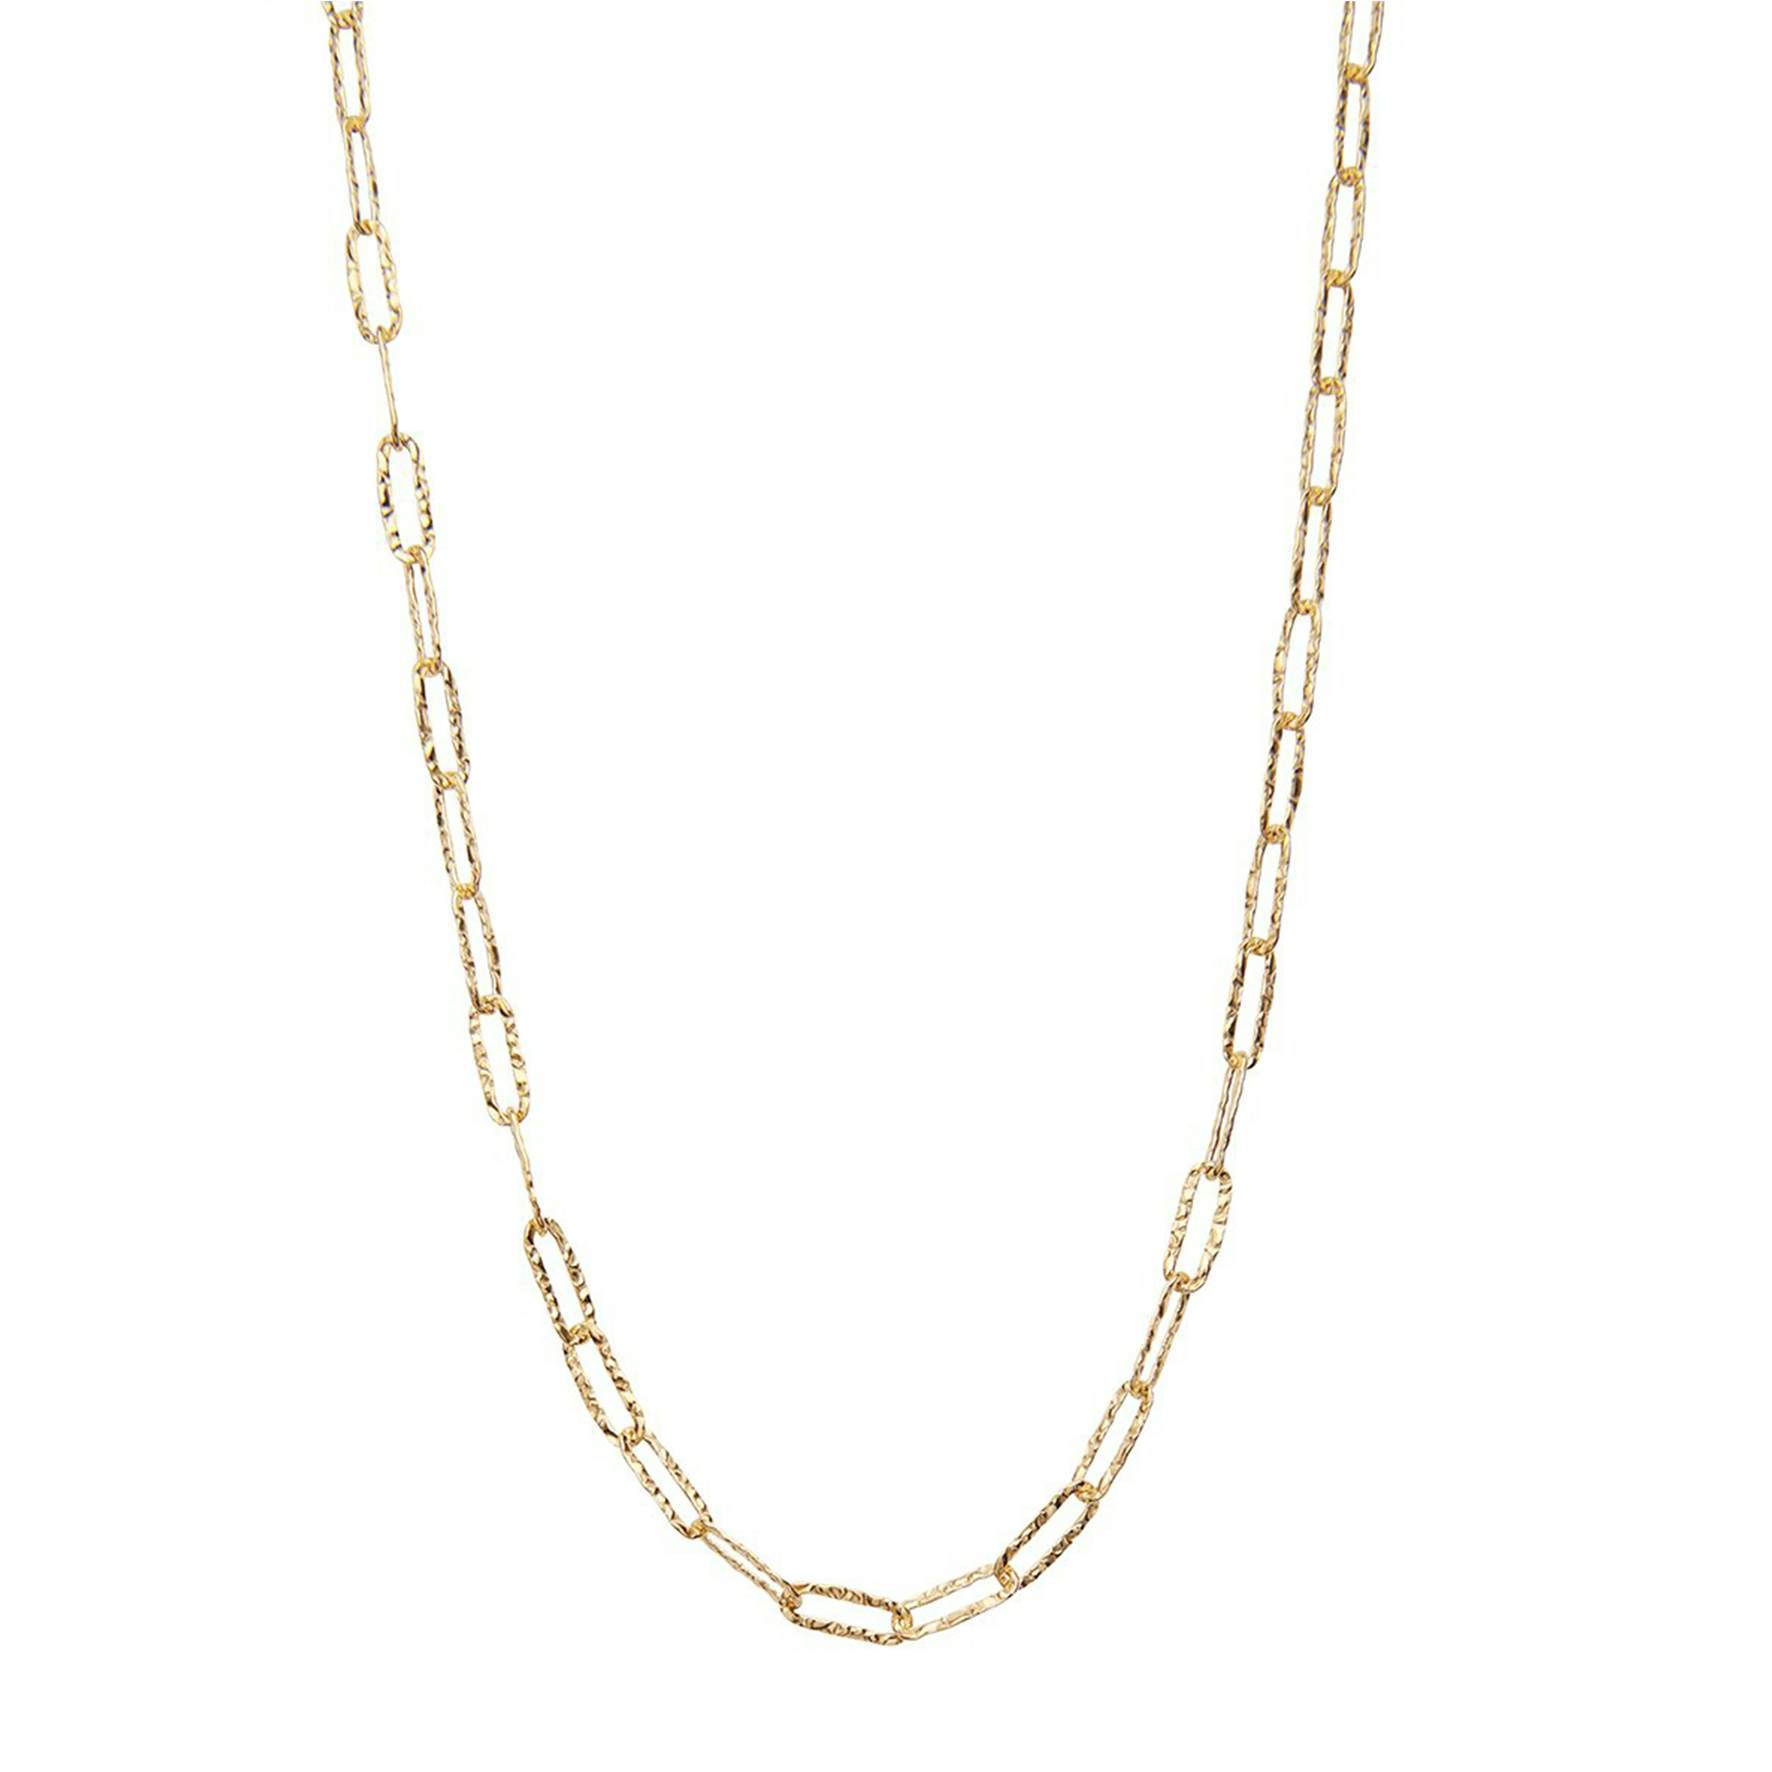 Ginny Necklace from Pico in Goldplated-Silver Sterling 925